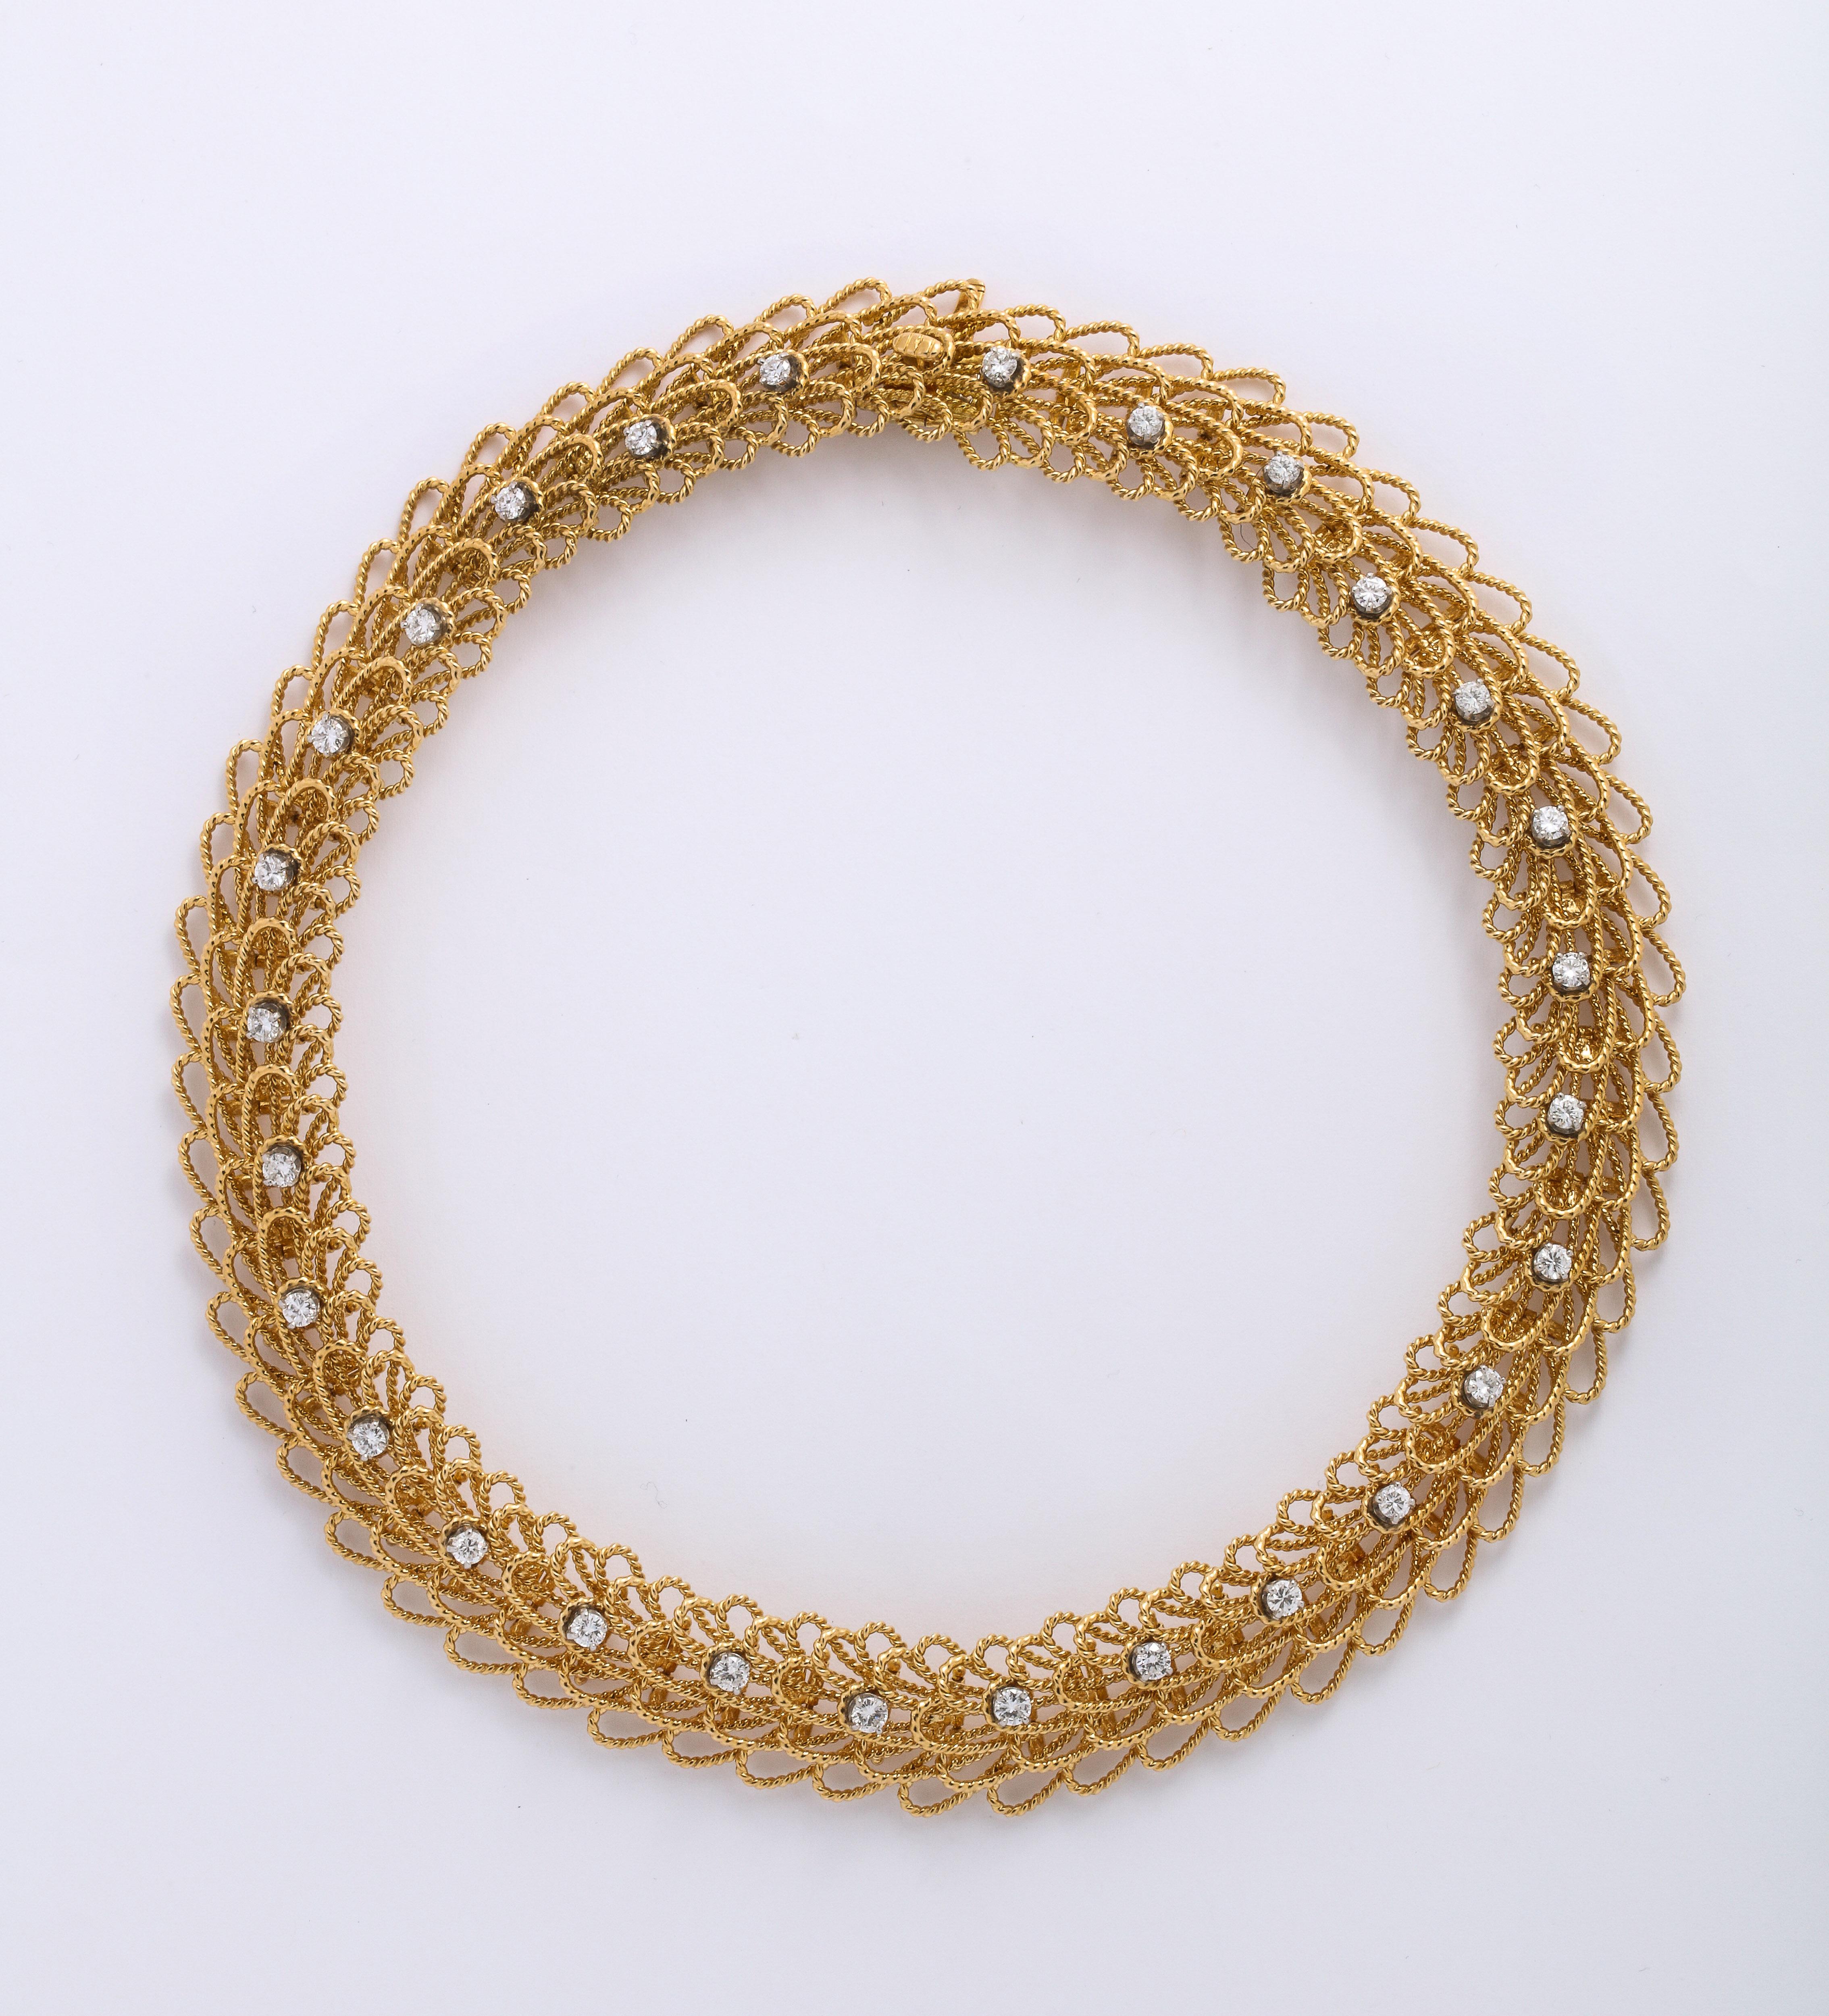 18k Gold 1970's Necklace with Earrings is a unique twisted Wire design, the necklace will sit beautifully on any neck due to its mobility. 

Necklace and Earring Set 16 Inches 
145 Grams total weight of 18k Gold
Necklace is 125 Grams w/ 28 diamonds